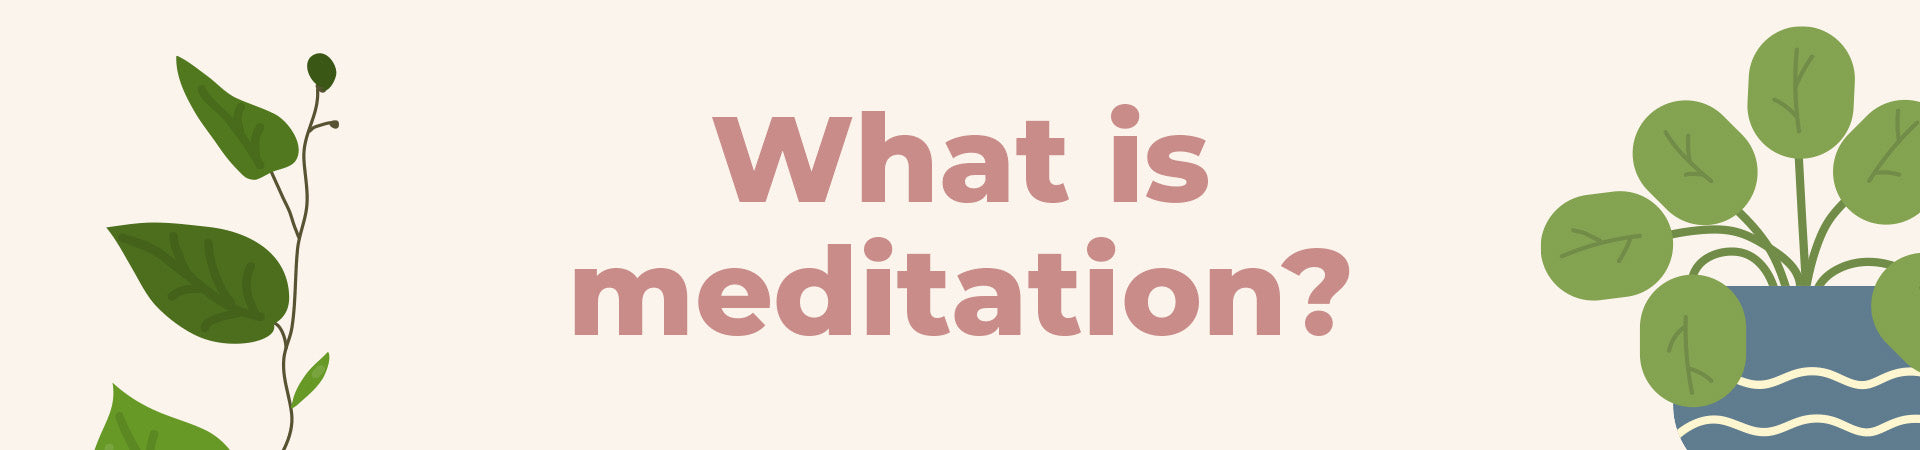 WHAT IS MEDITATION?